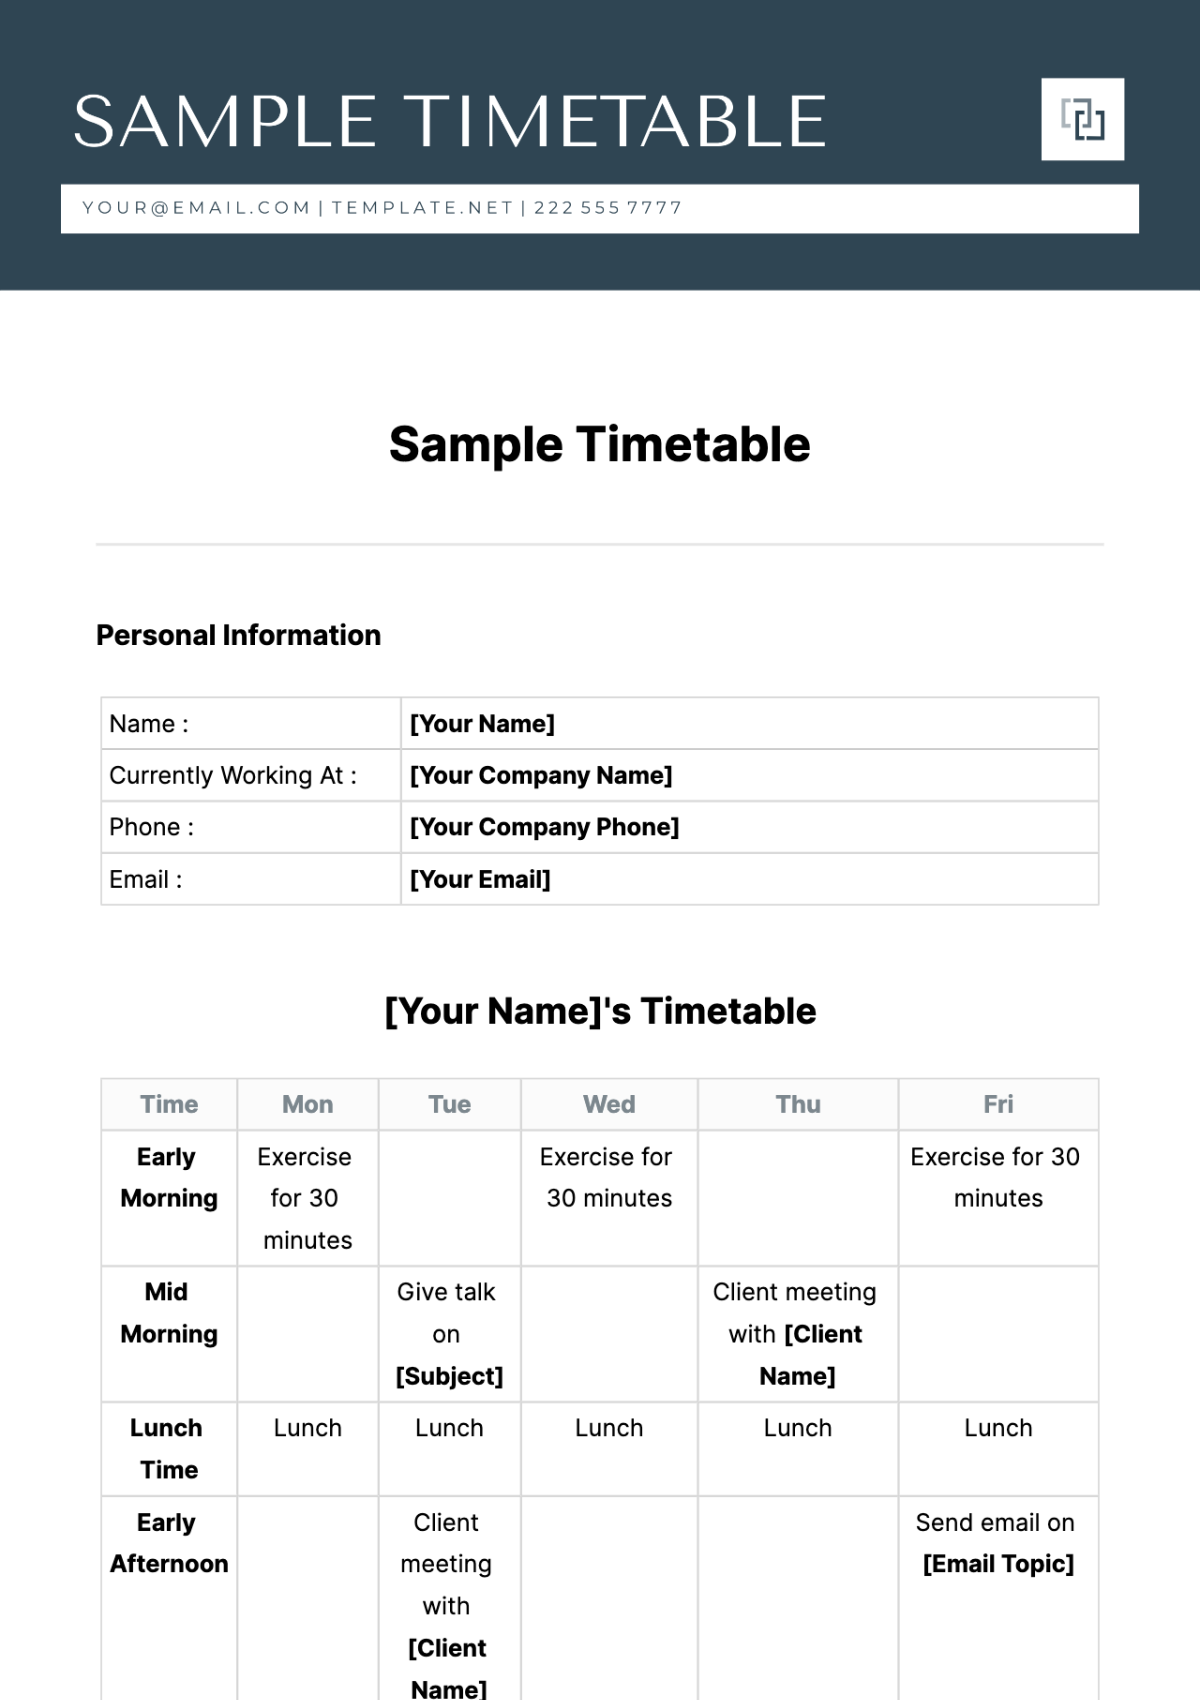 Sample Timetable Template